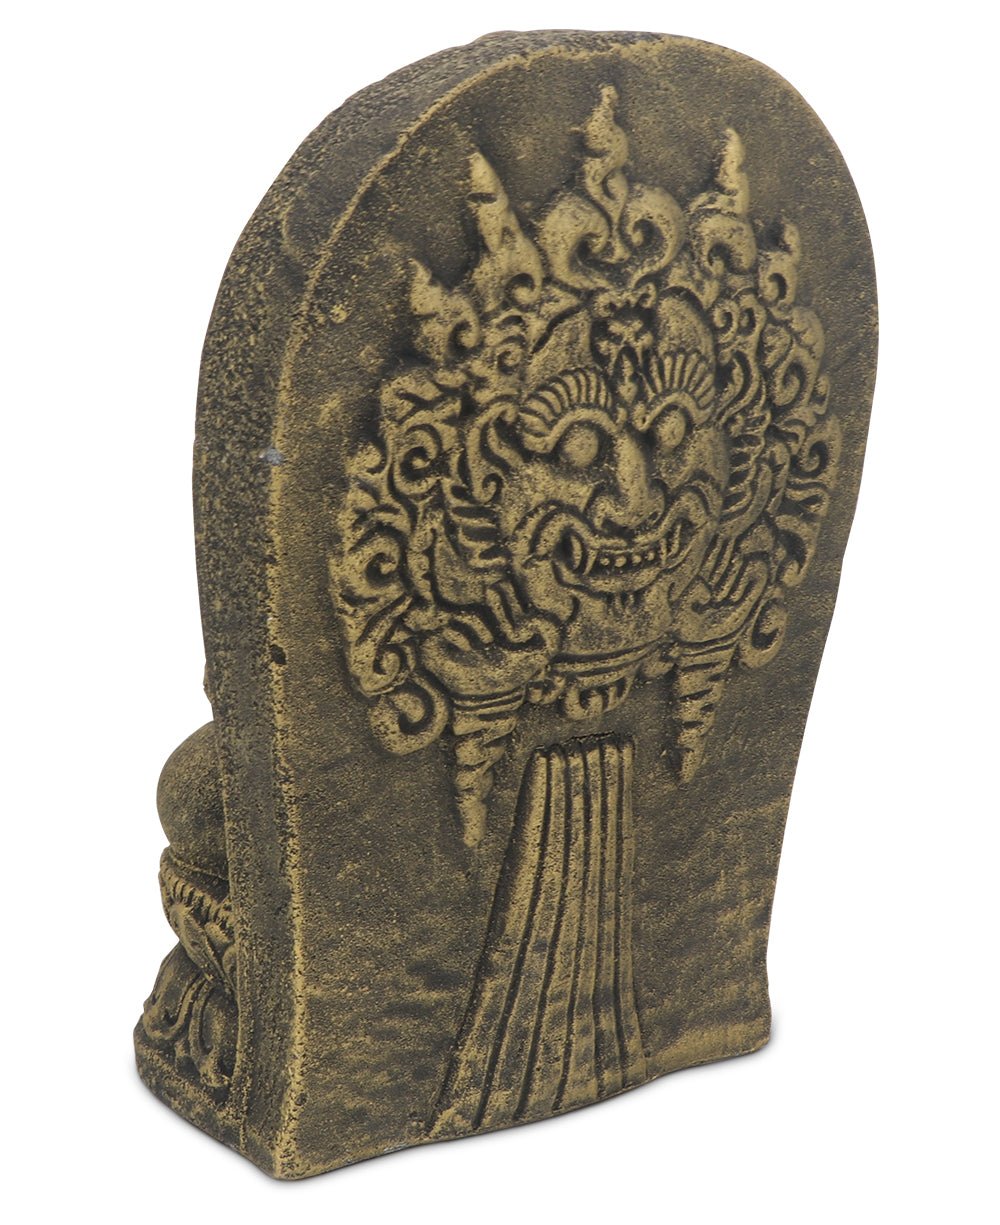 Cast Stone Detailed Ganesh Statue For Home and Garden - Sculptures & Statues